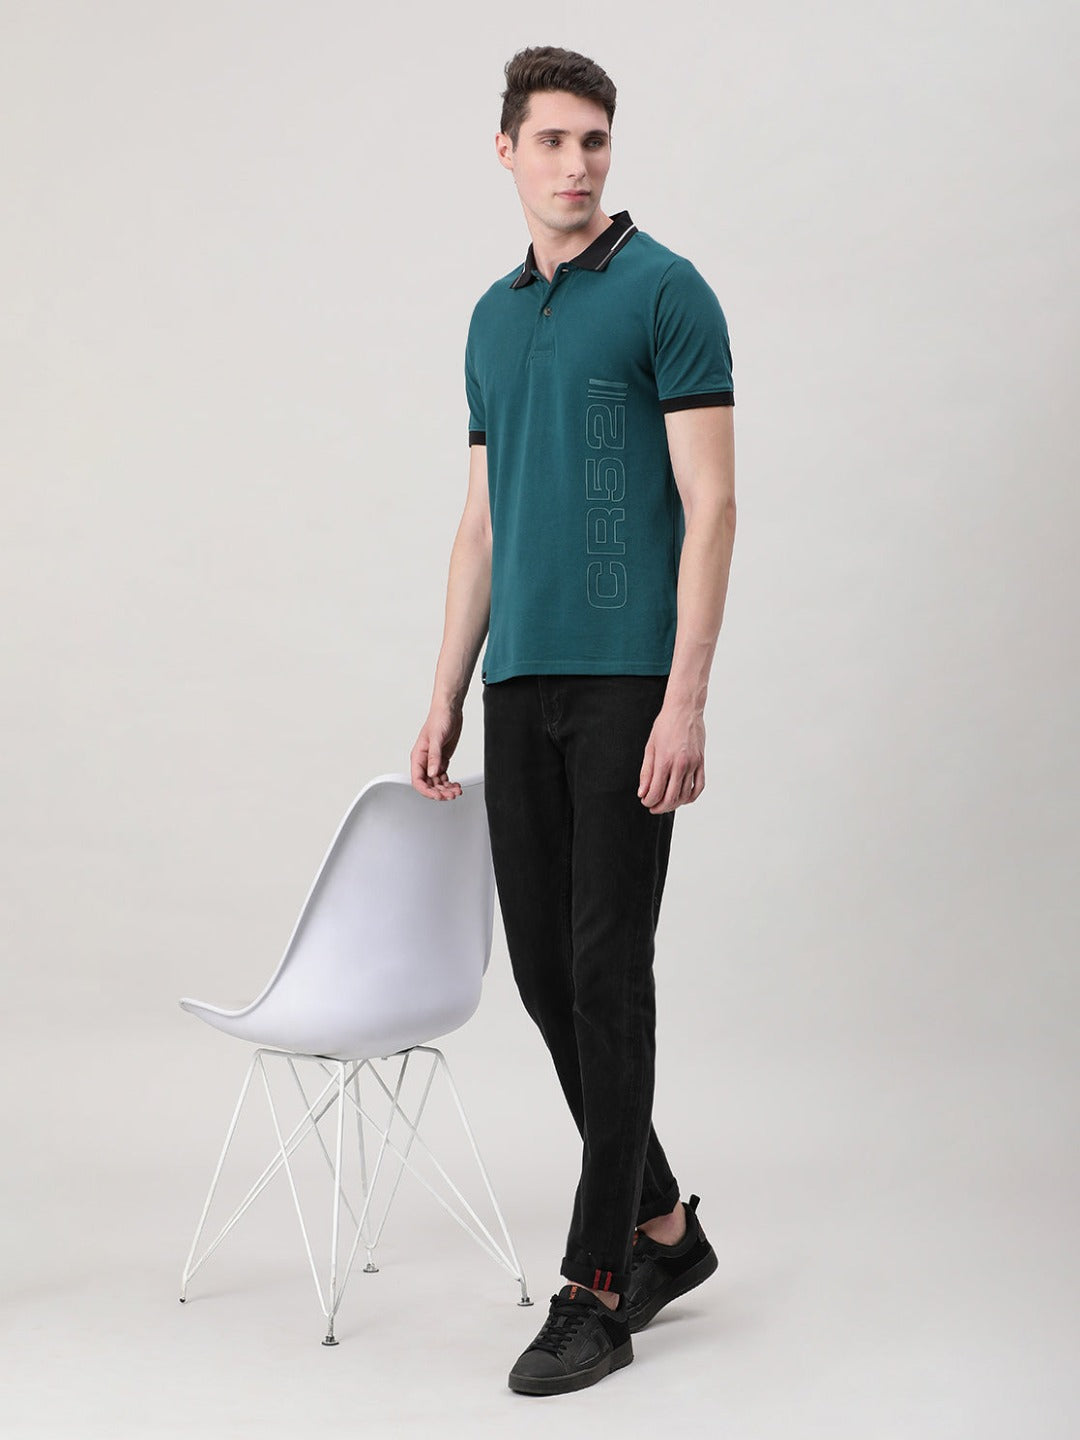 Crocodile Casual T-Shirt Half Sleeve Slim Fit Solid Printed with Collar Teal for Men